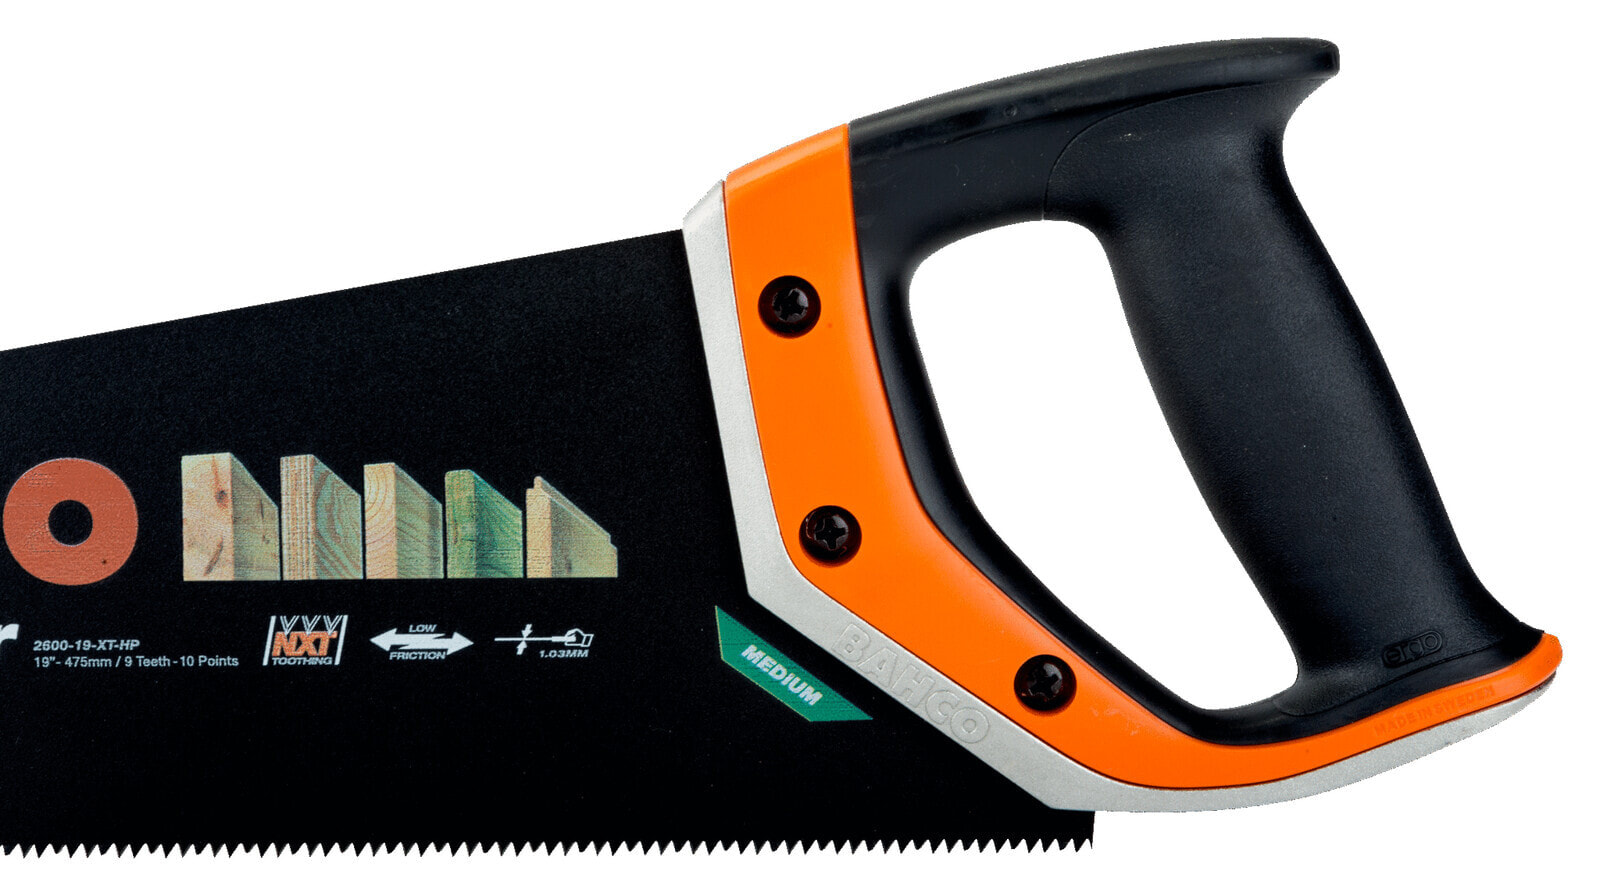 Ручная пила и ножовка Bahco ERGO Superior Saw for Plaster/Boards of Wood Based Materials 9/10 TPI 19